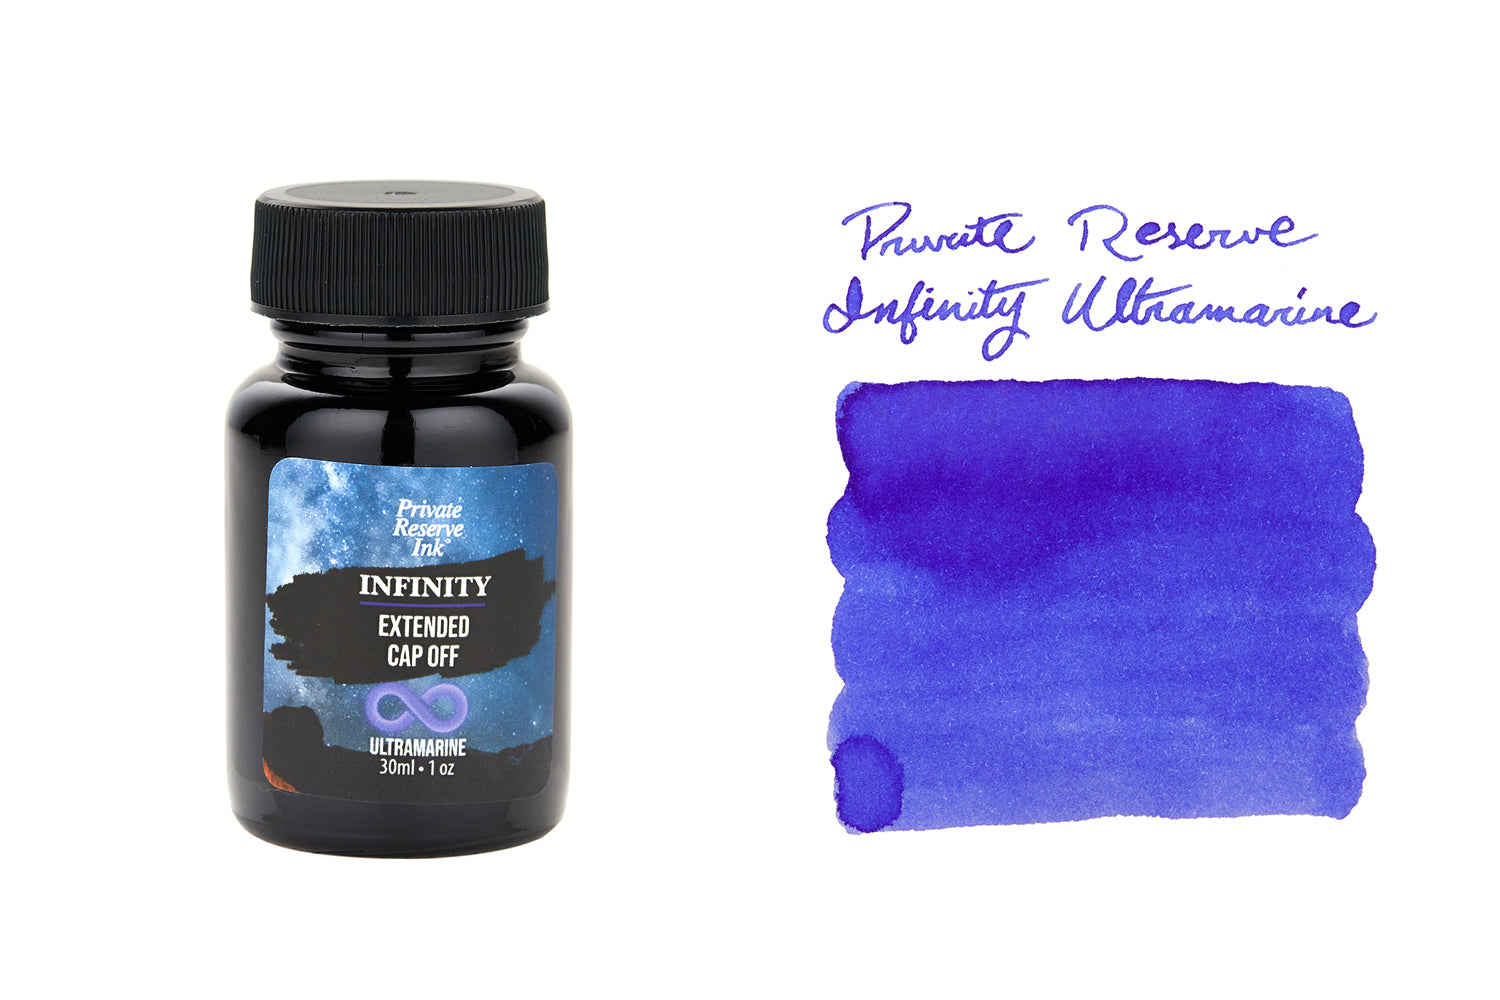 Intermediate Guide to Fountain Pen Inks: Sheen, Shading, Shimmer, and More